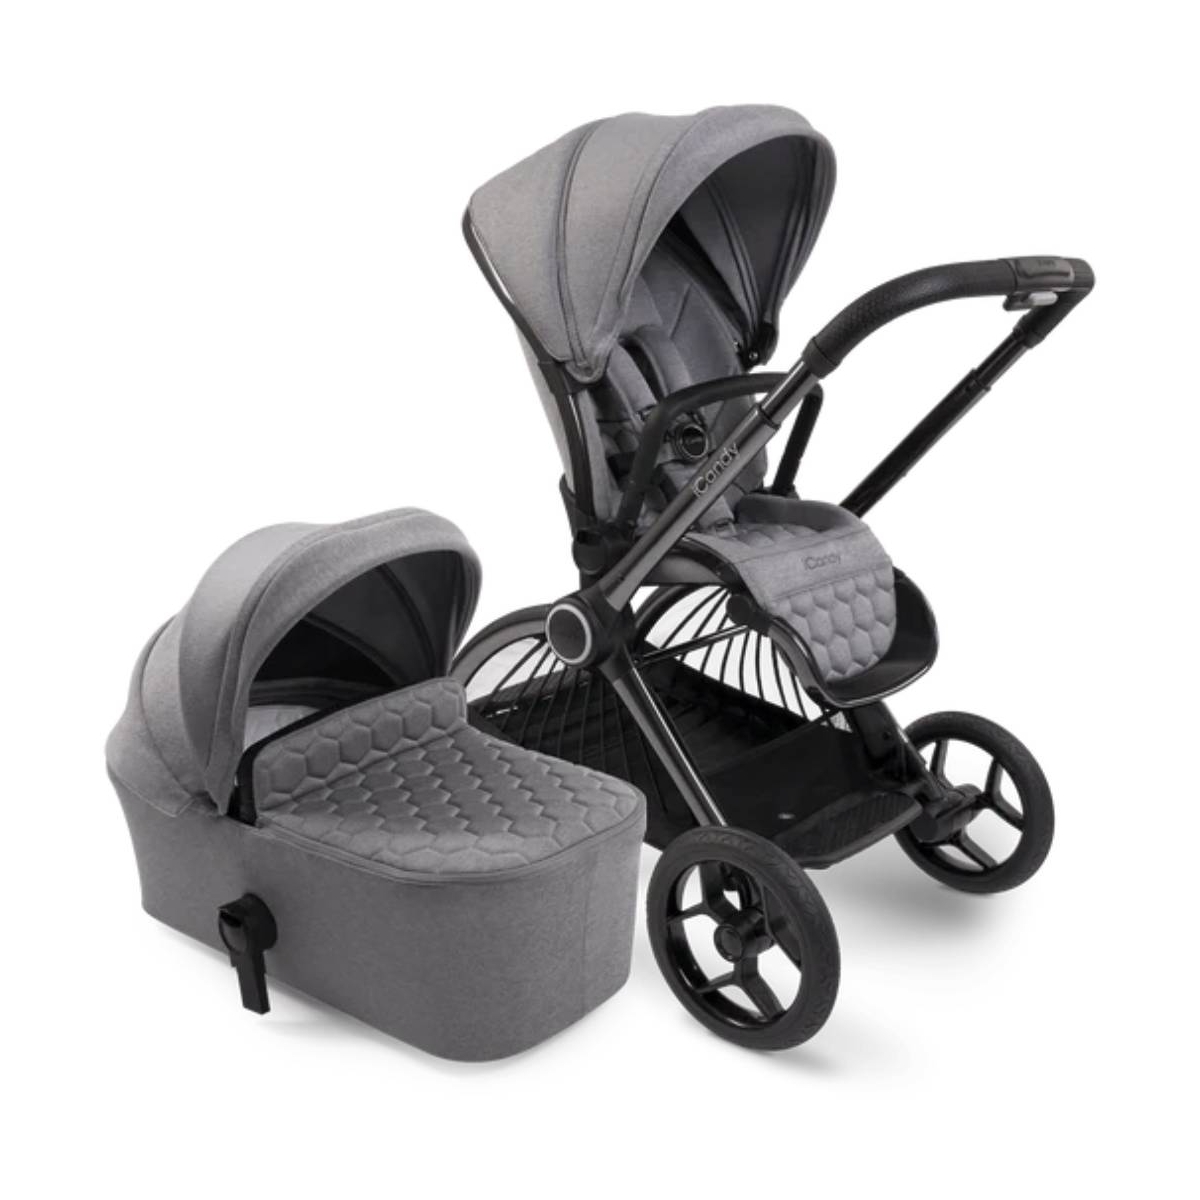 iCandy Core Combo 2-in-1 Pram System Bundle